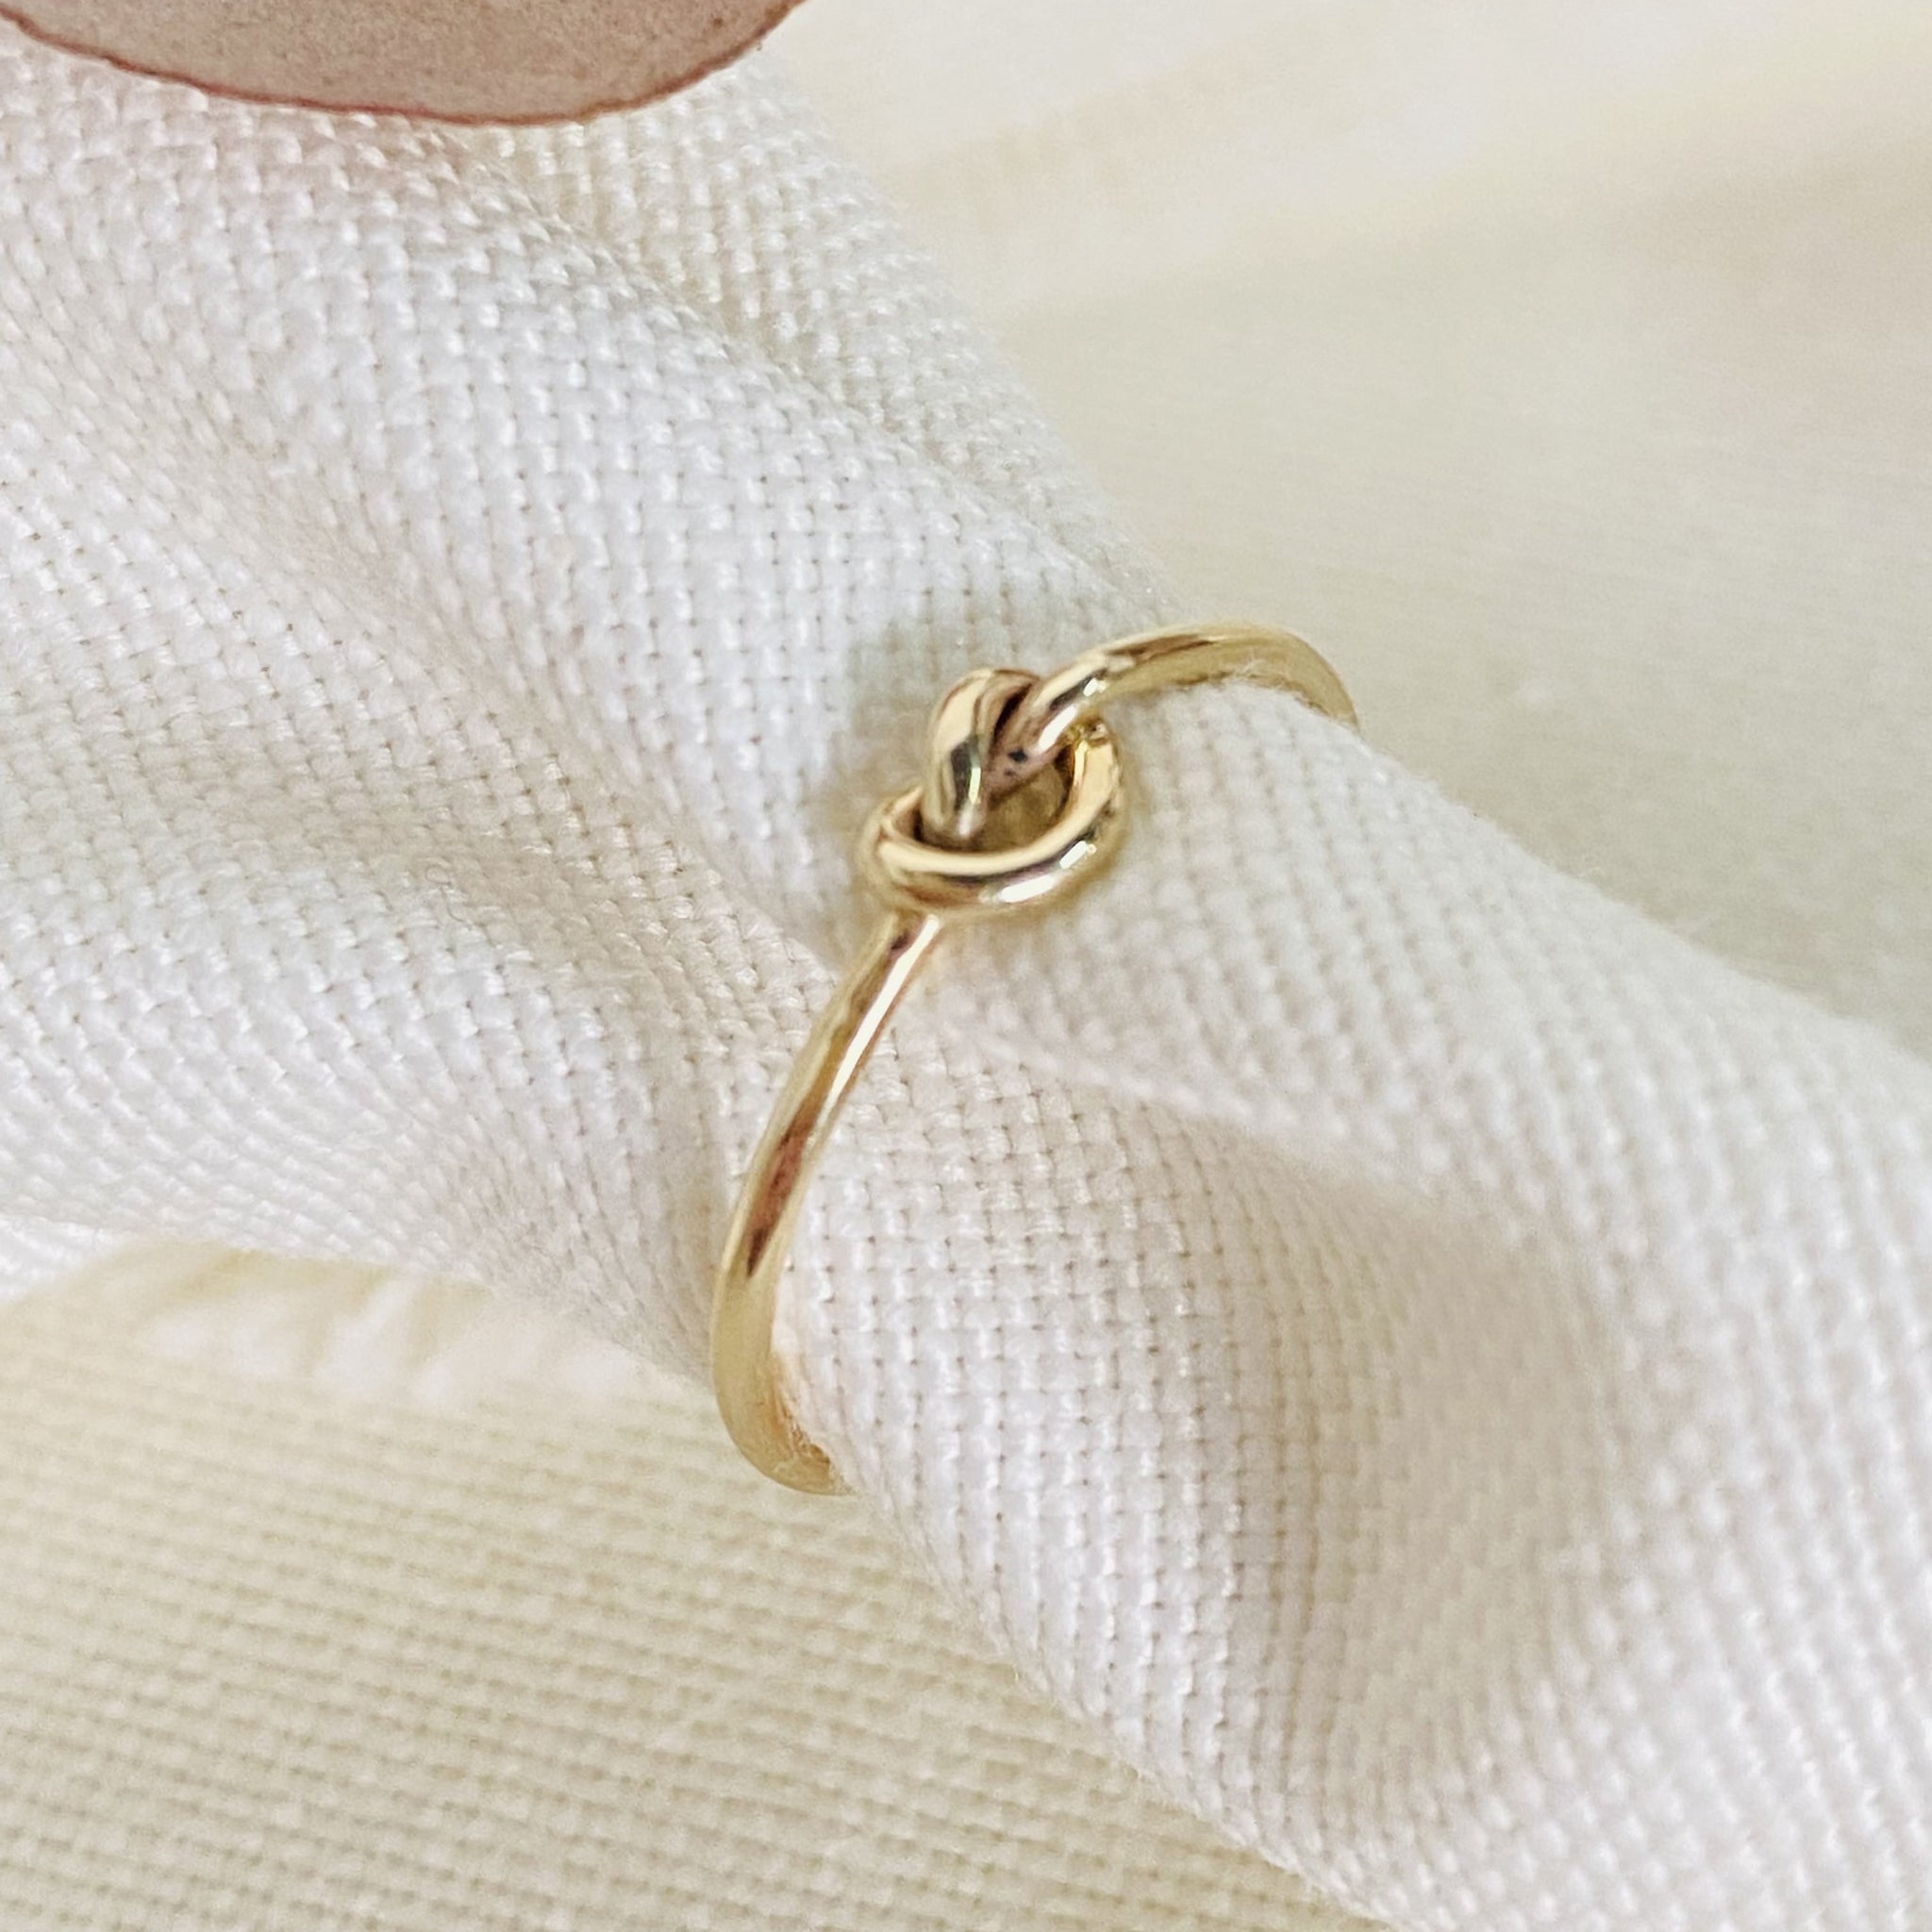 Antique 18ct Gold Knot Ring - Vintage Jewellery & Watches Online